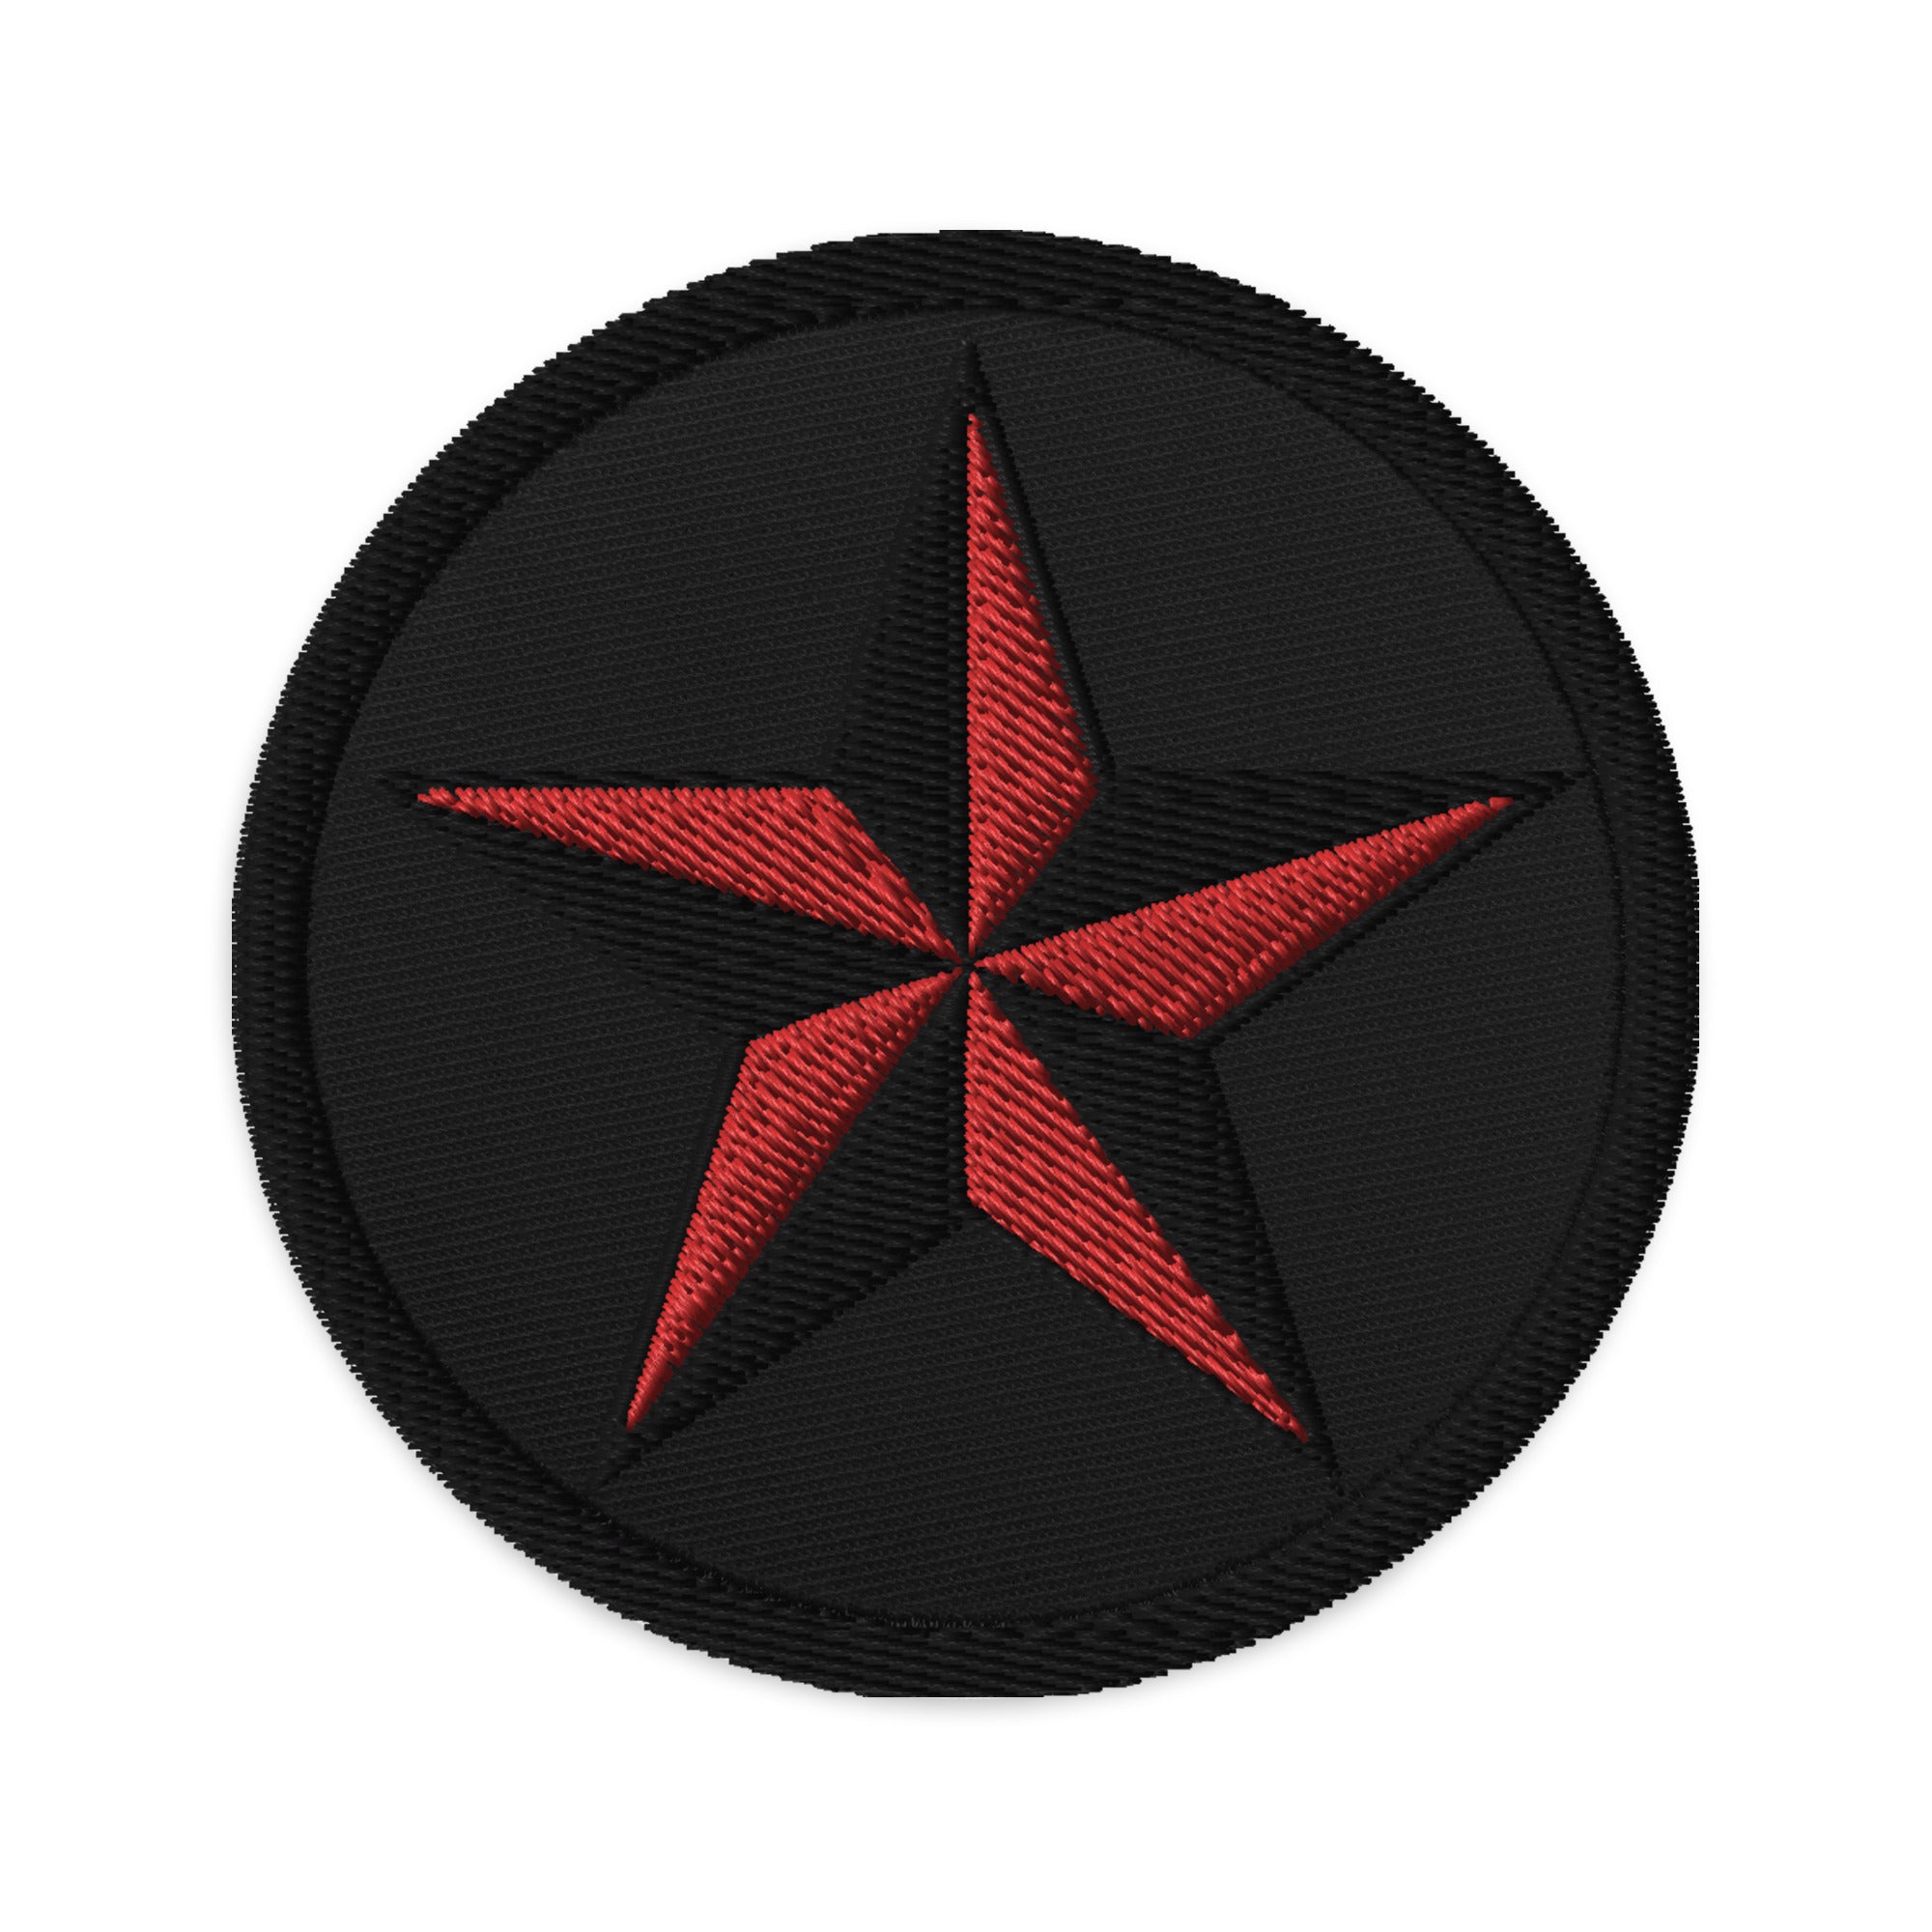 Nautical Star North Star Embroidered Patch Red / Black Thread - Edge of Life Designs